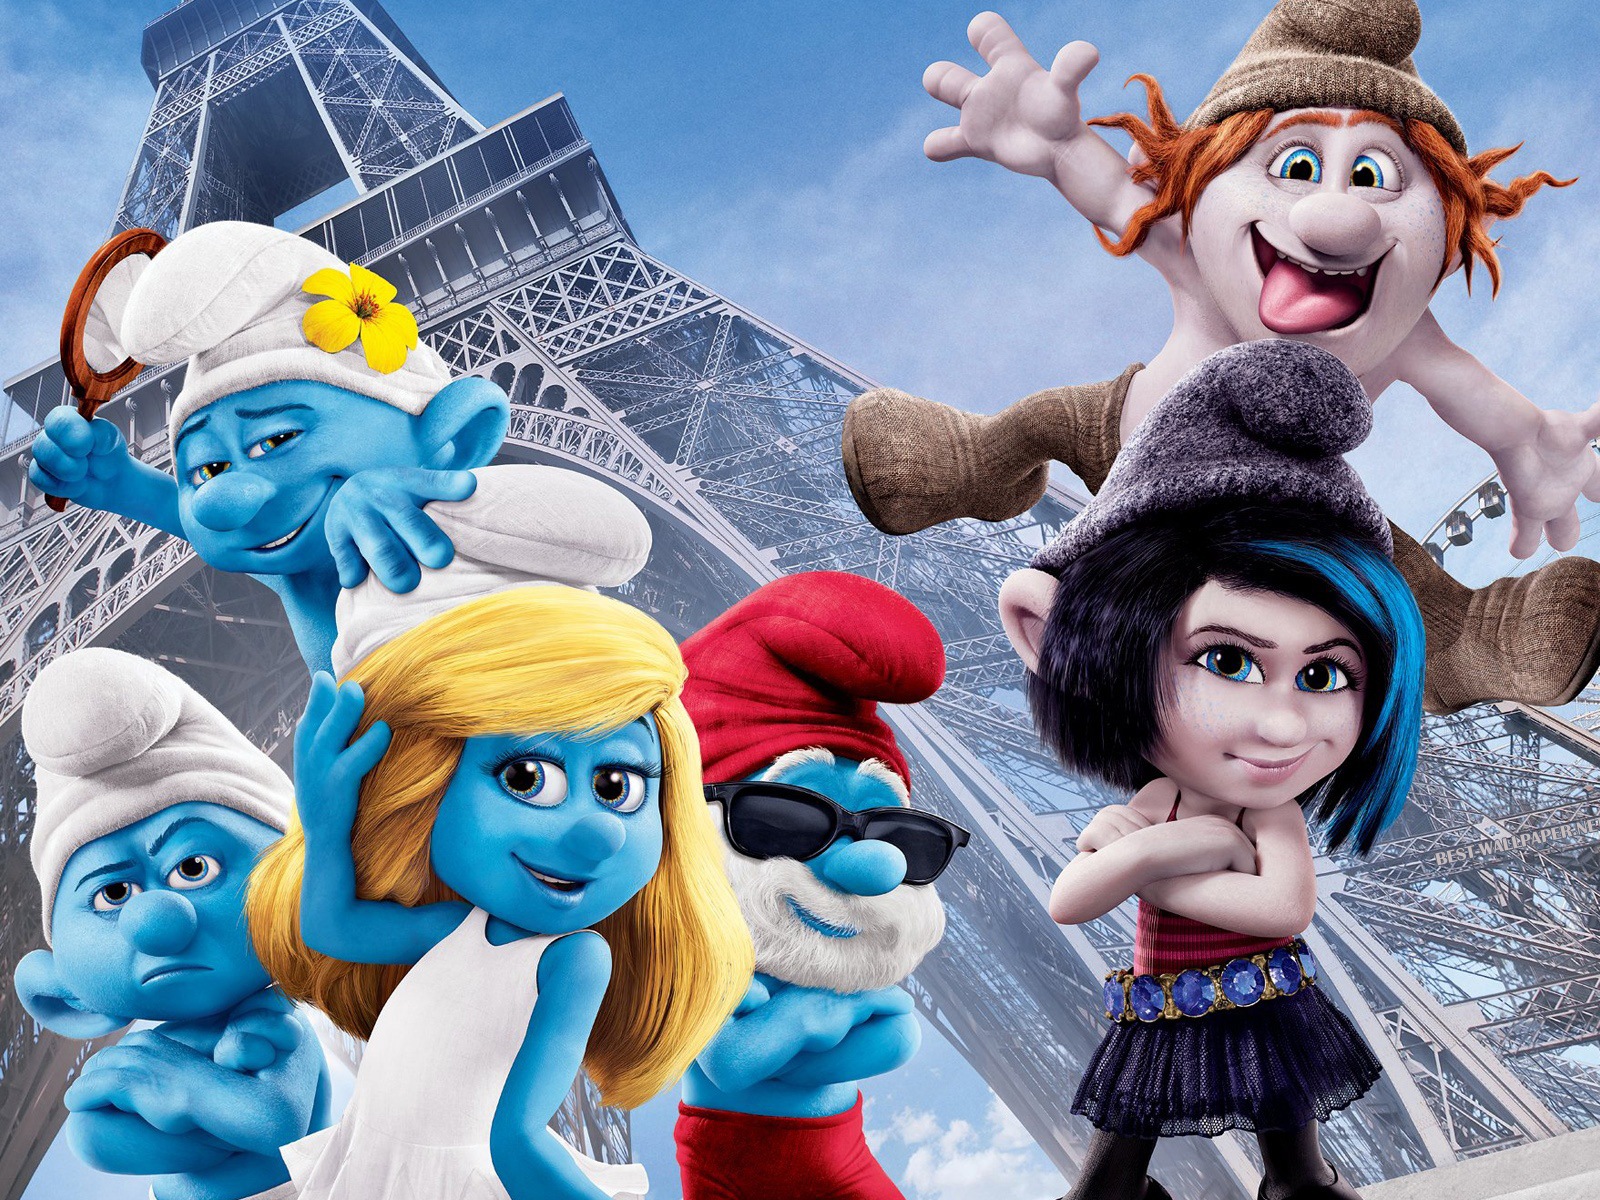 The Smurfs 2 HD movie wallpapers #1 - 1600x1200